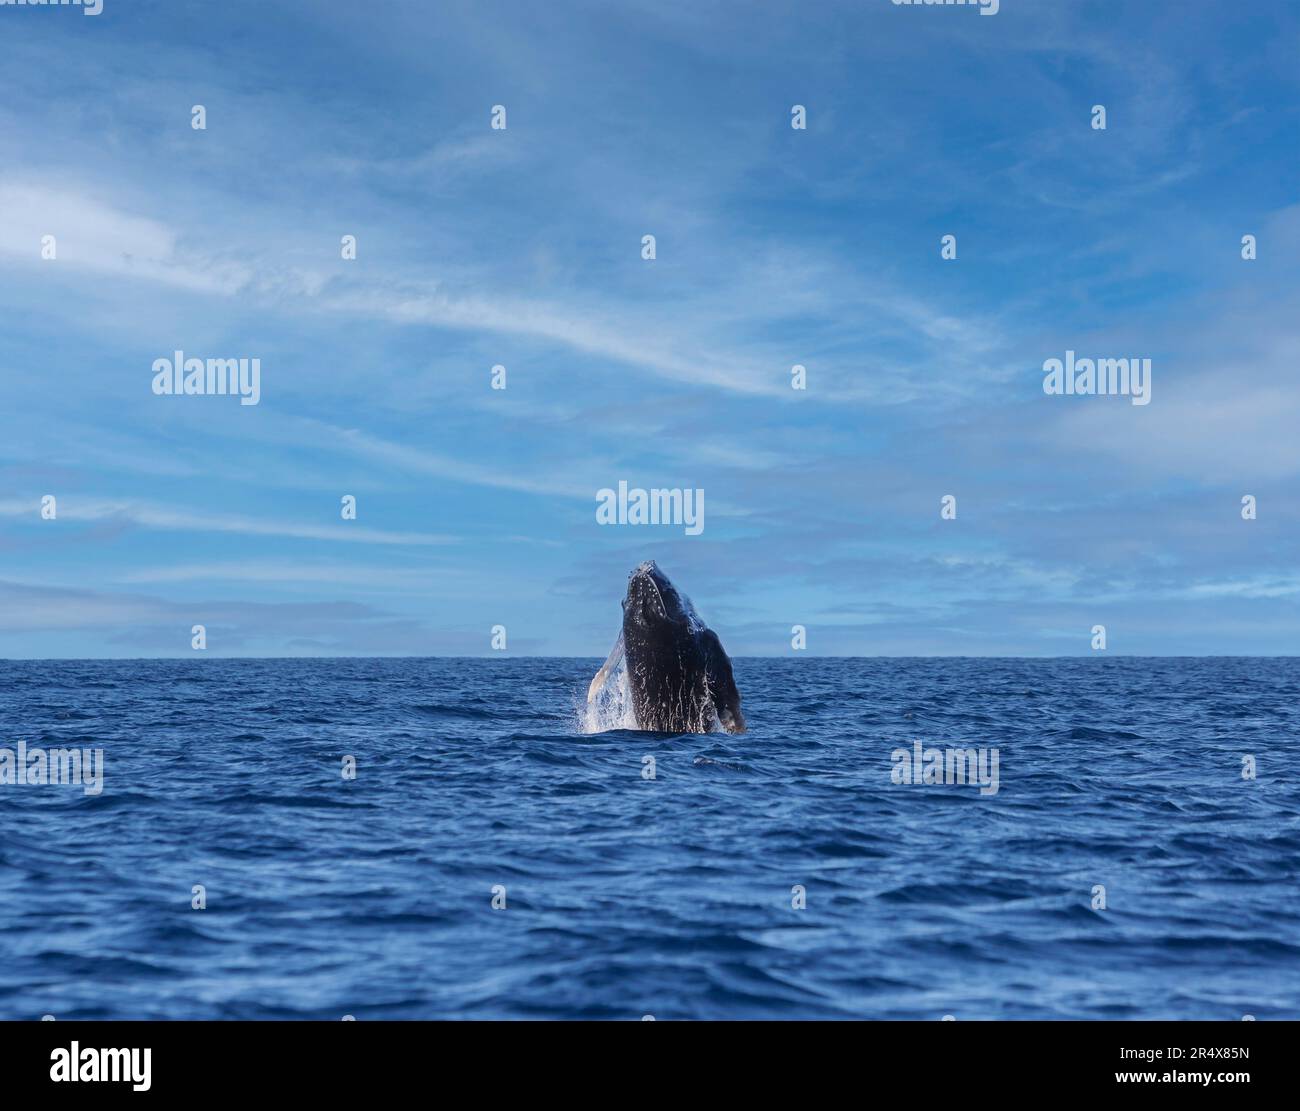 Baby Humpback Whale (Megaptera Novaeangliae) breaching out of the Pacific Ocean; Maui, Hawaii, United States of America Stock Photo